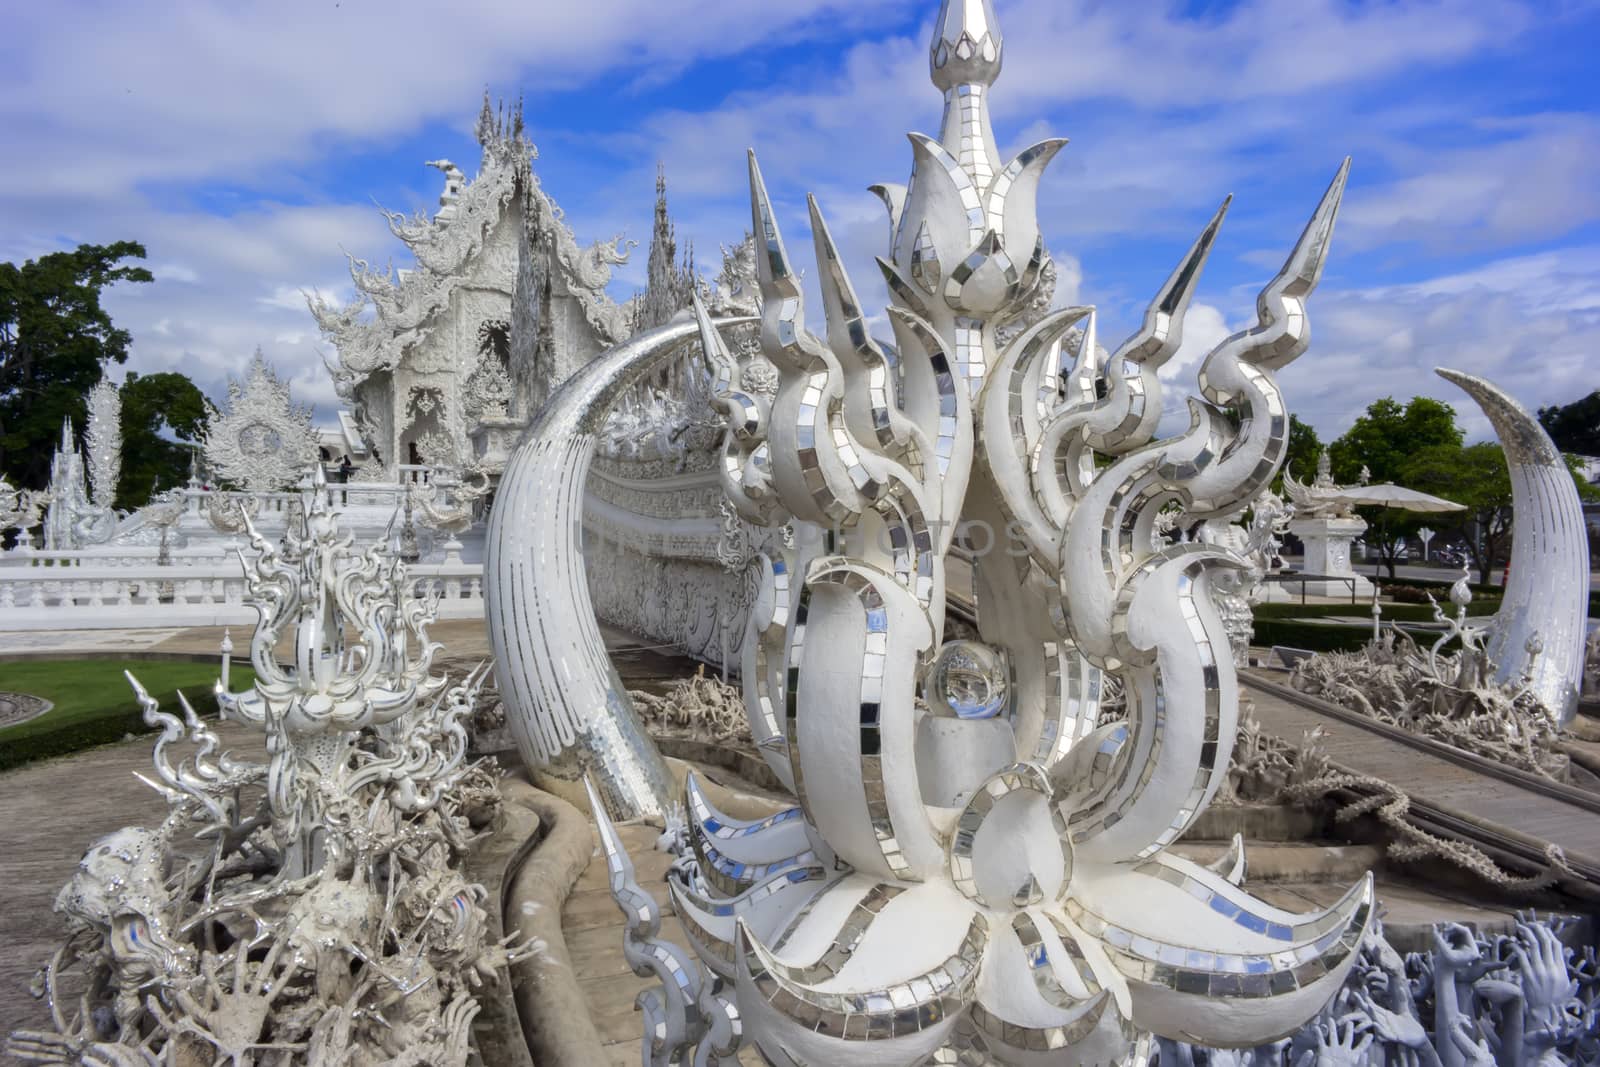 Architectural Details of Wat Rong Khun. Buddhist temple in Chiang Rai, Thailand.